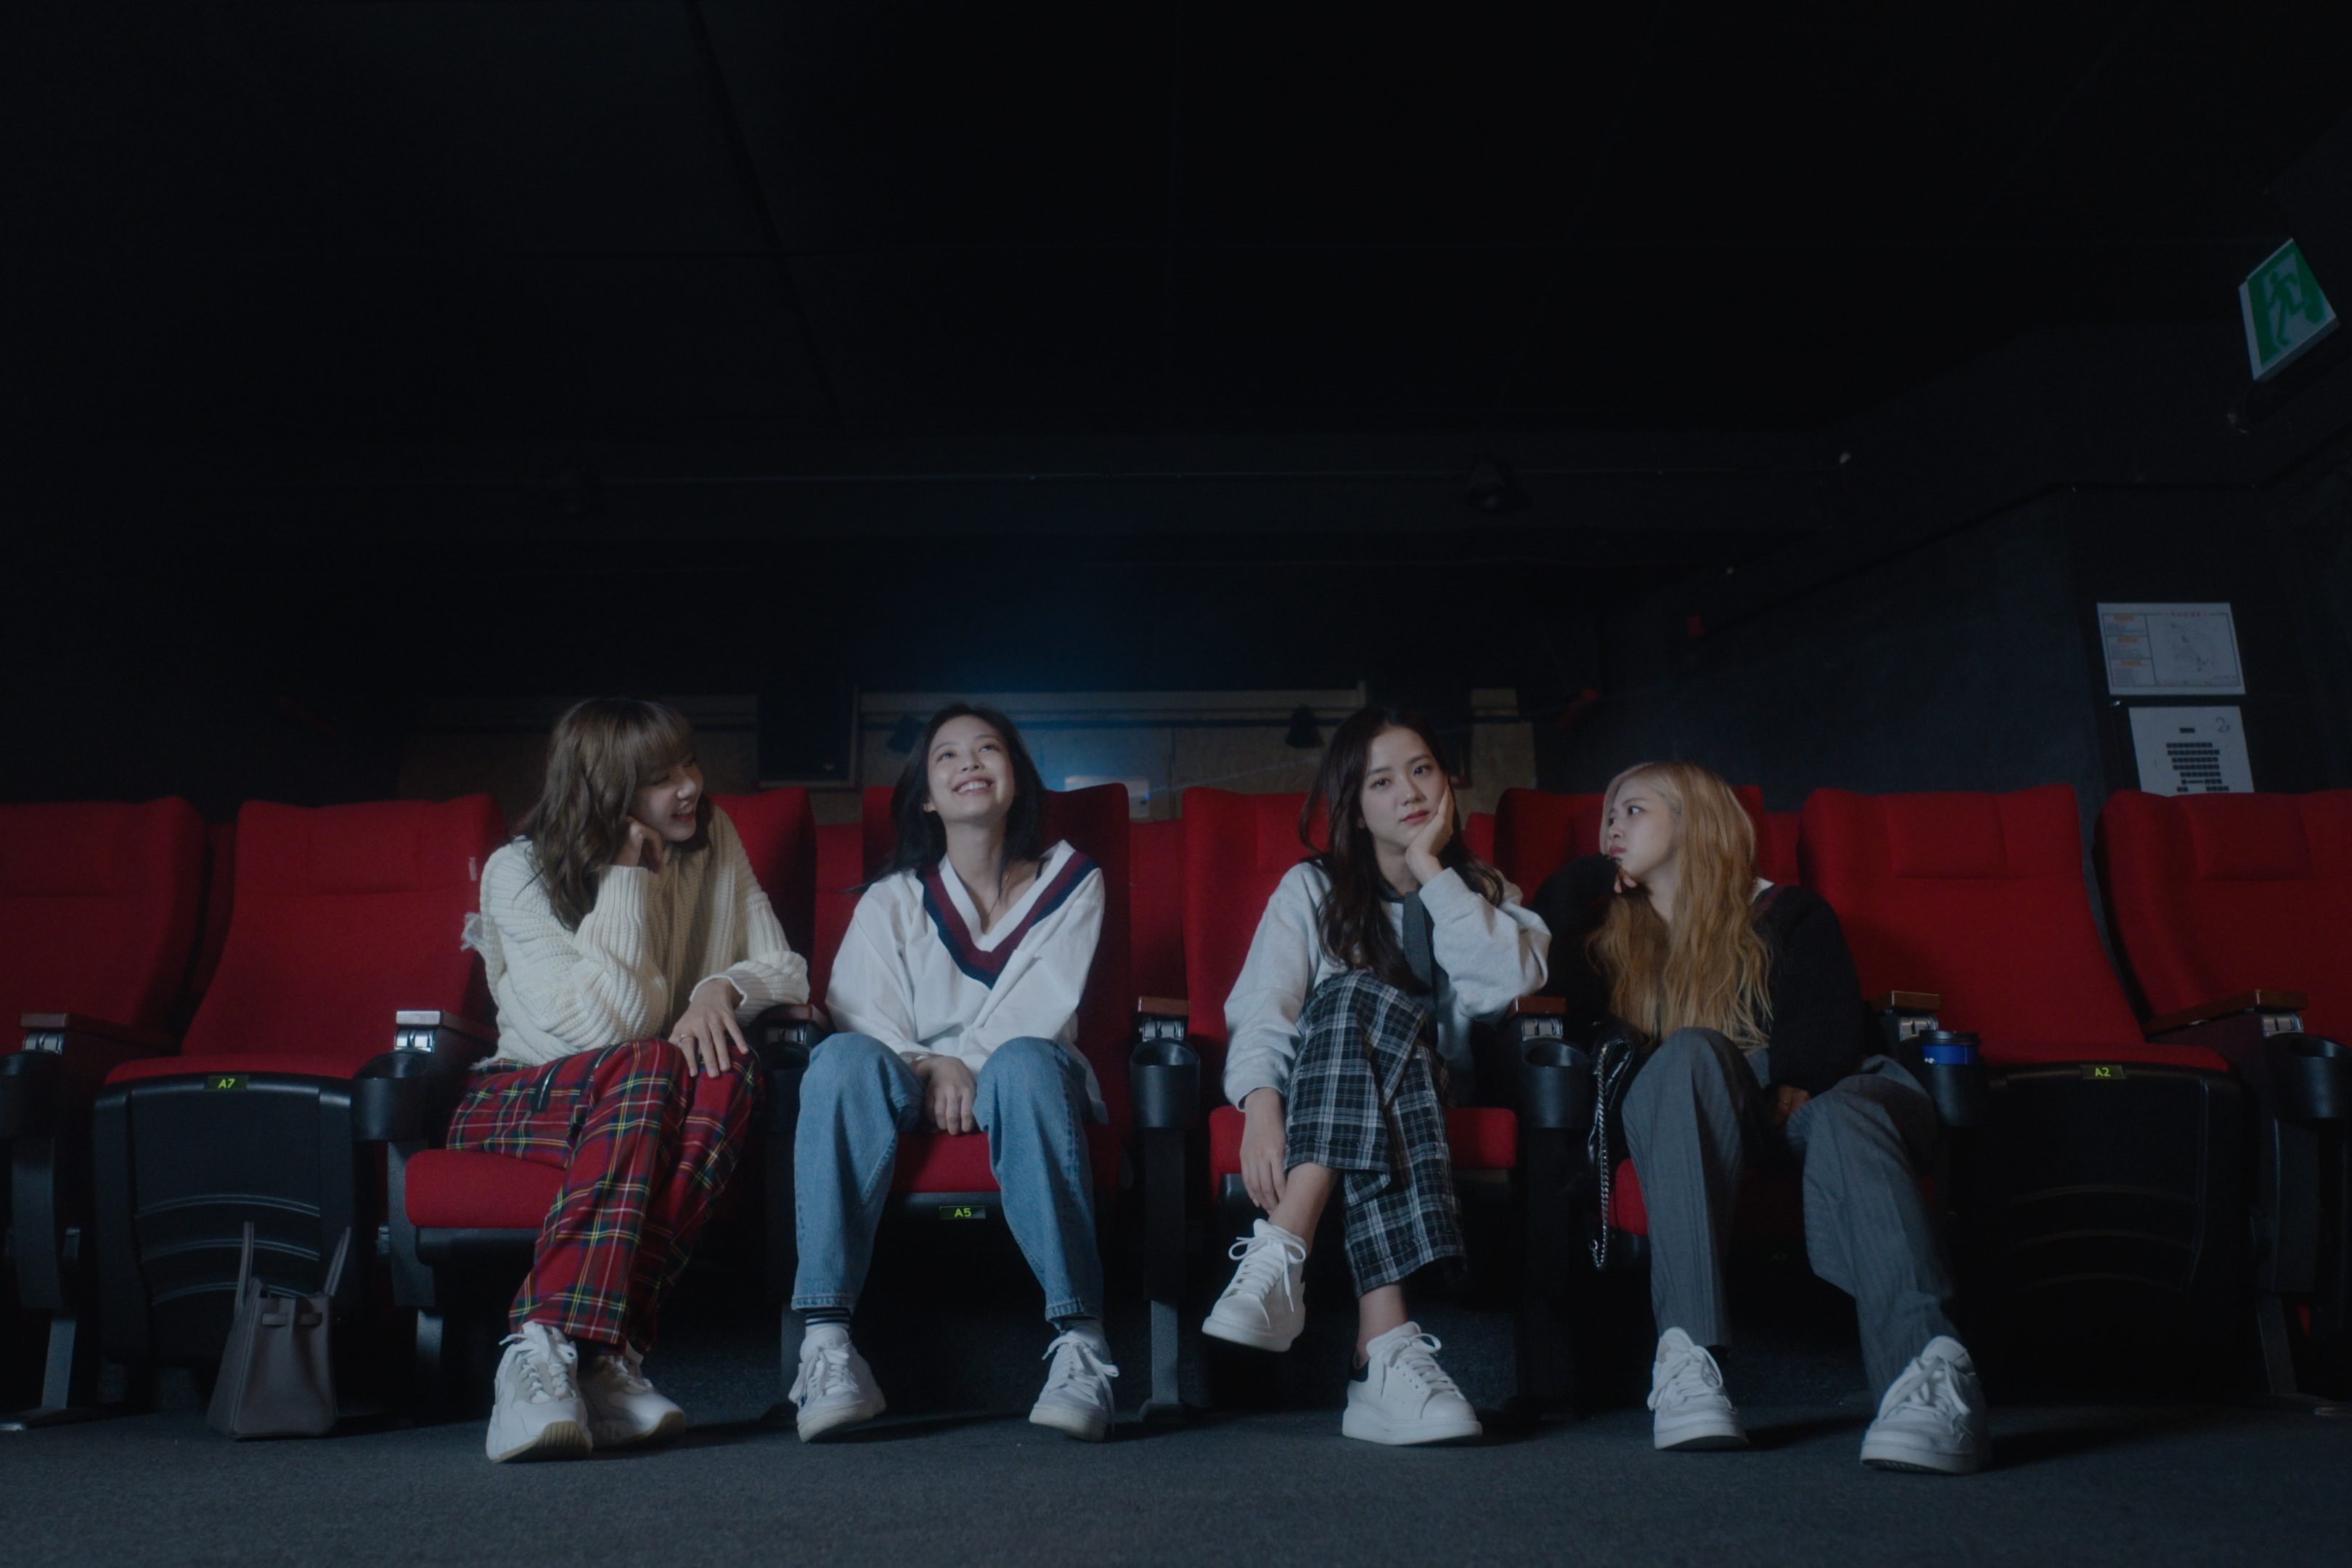 Ahead of docu release, BLACKPINK to hold virtual fan event